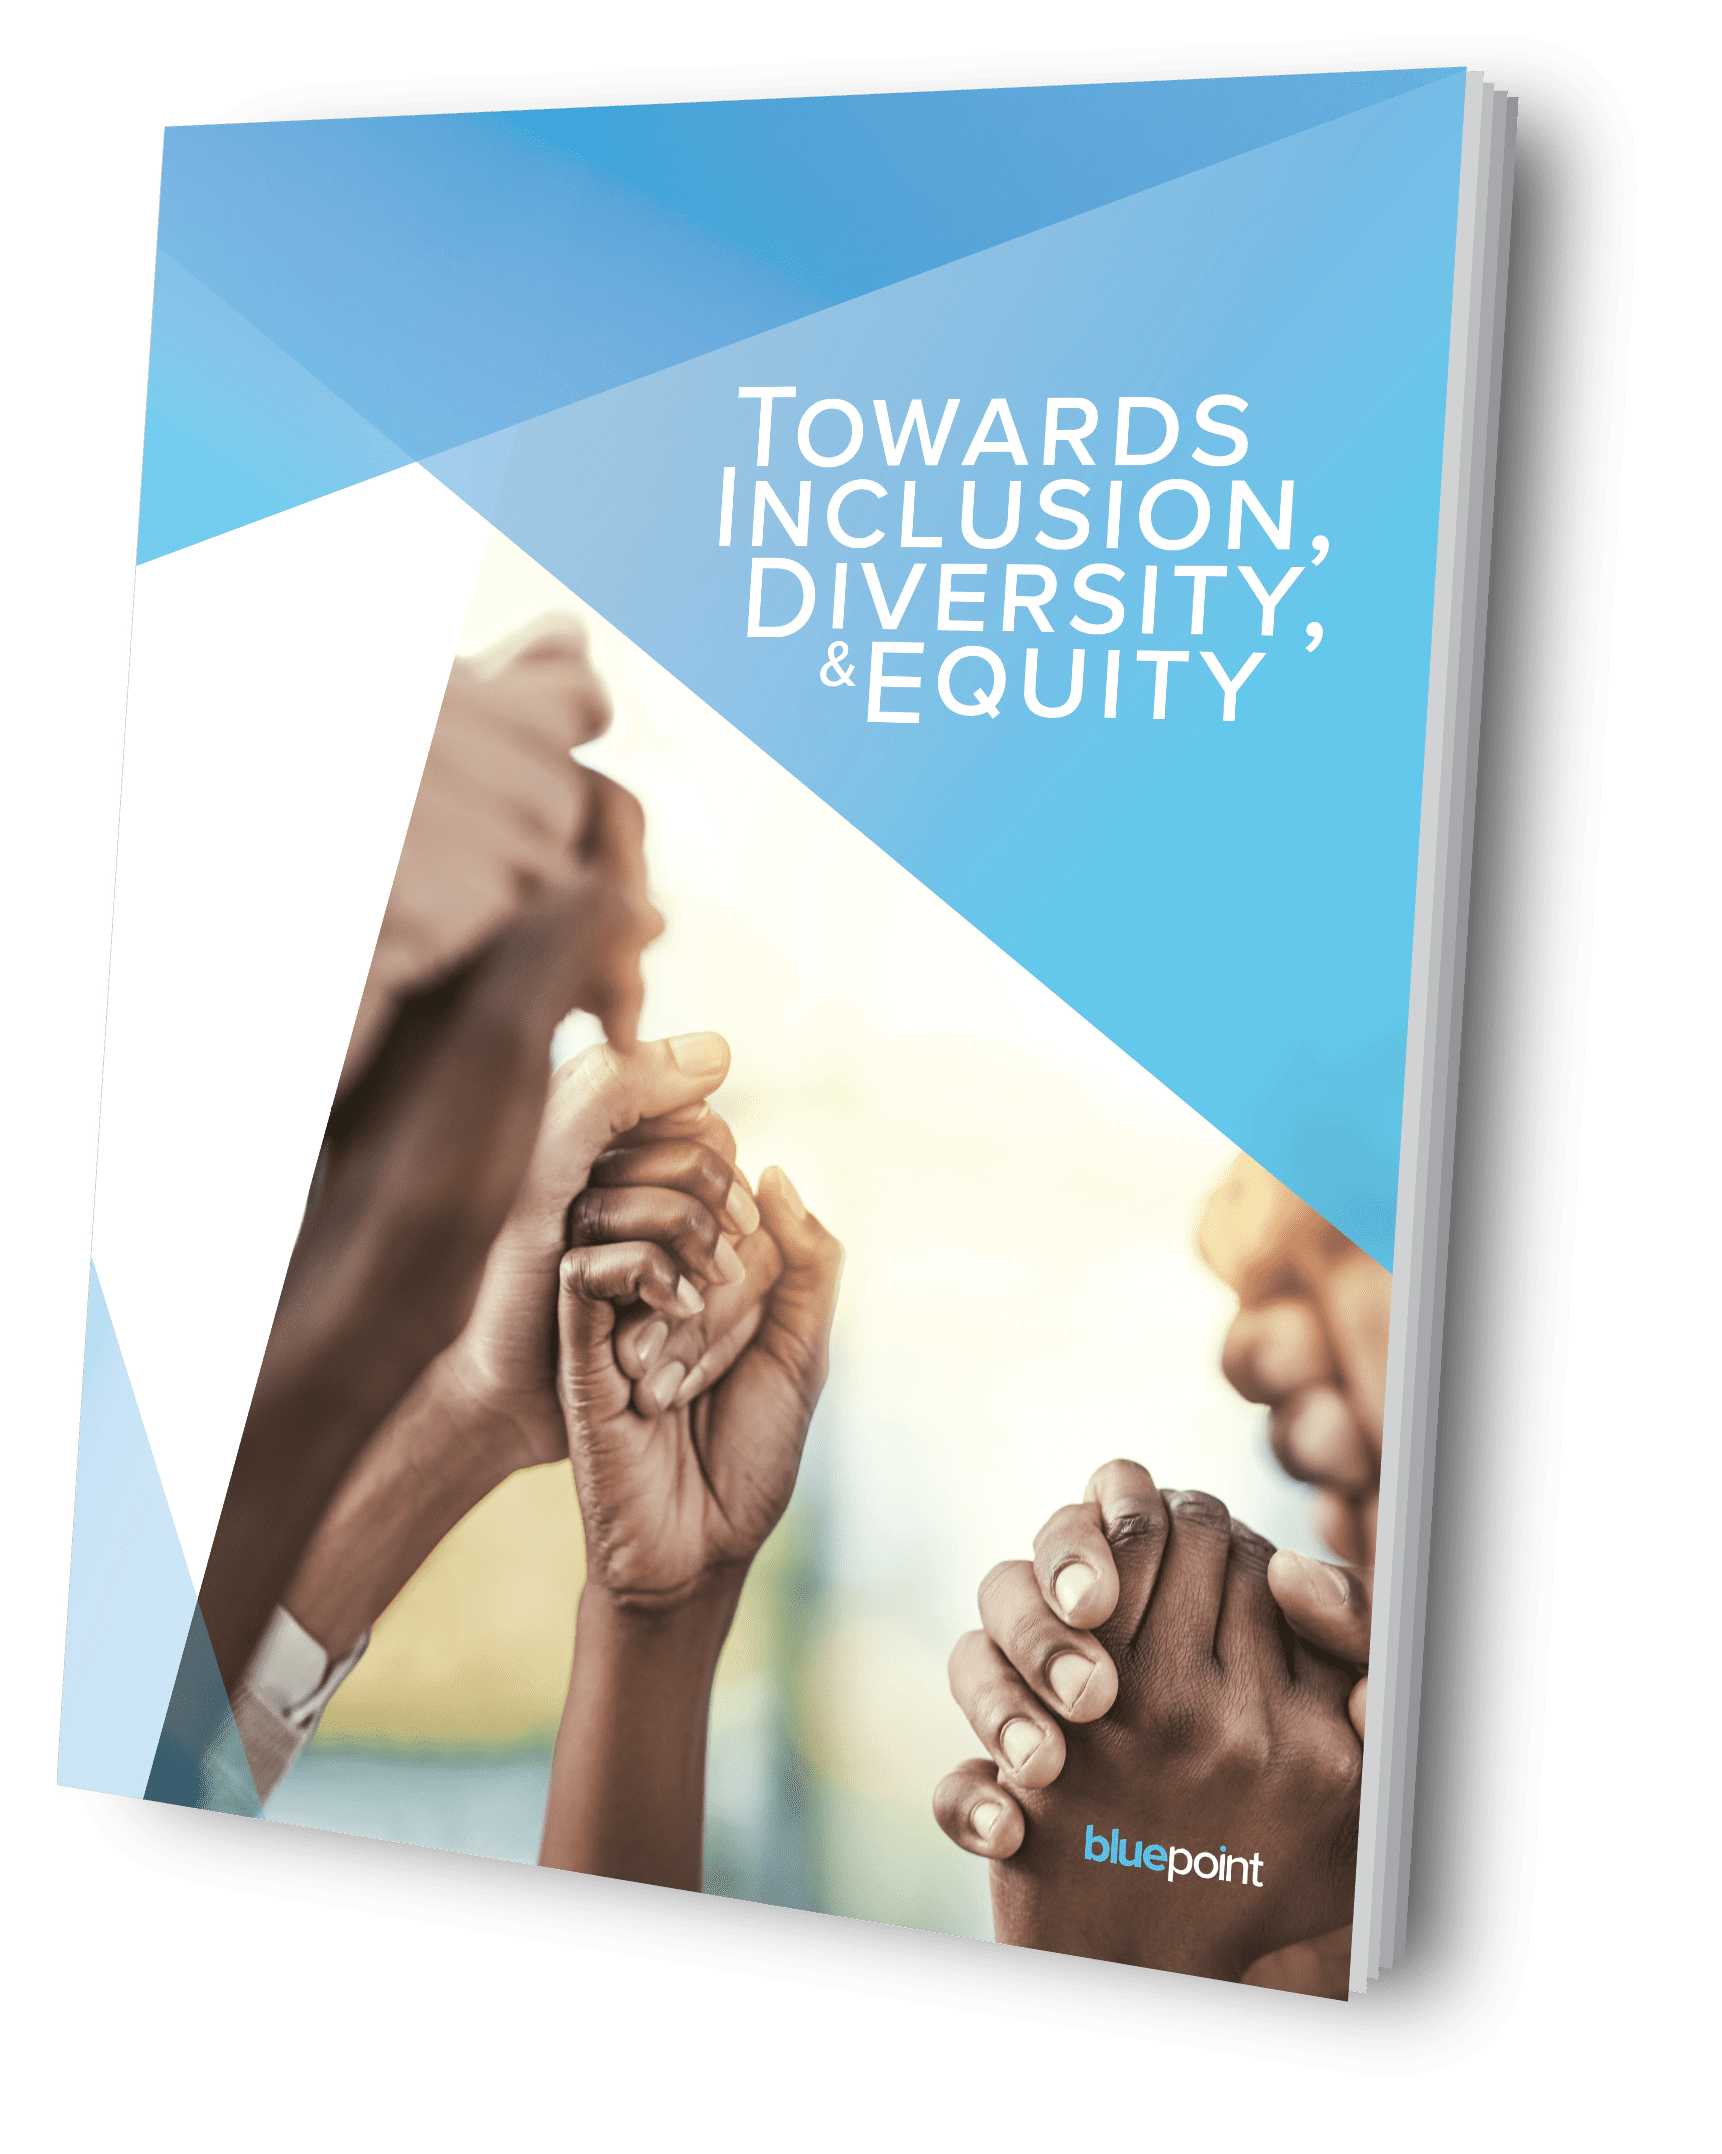 Towards Inclusion, Diversity, & Equity